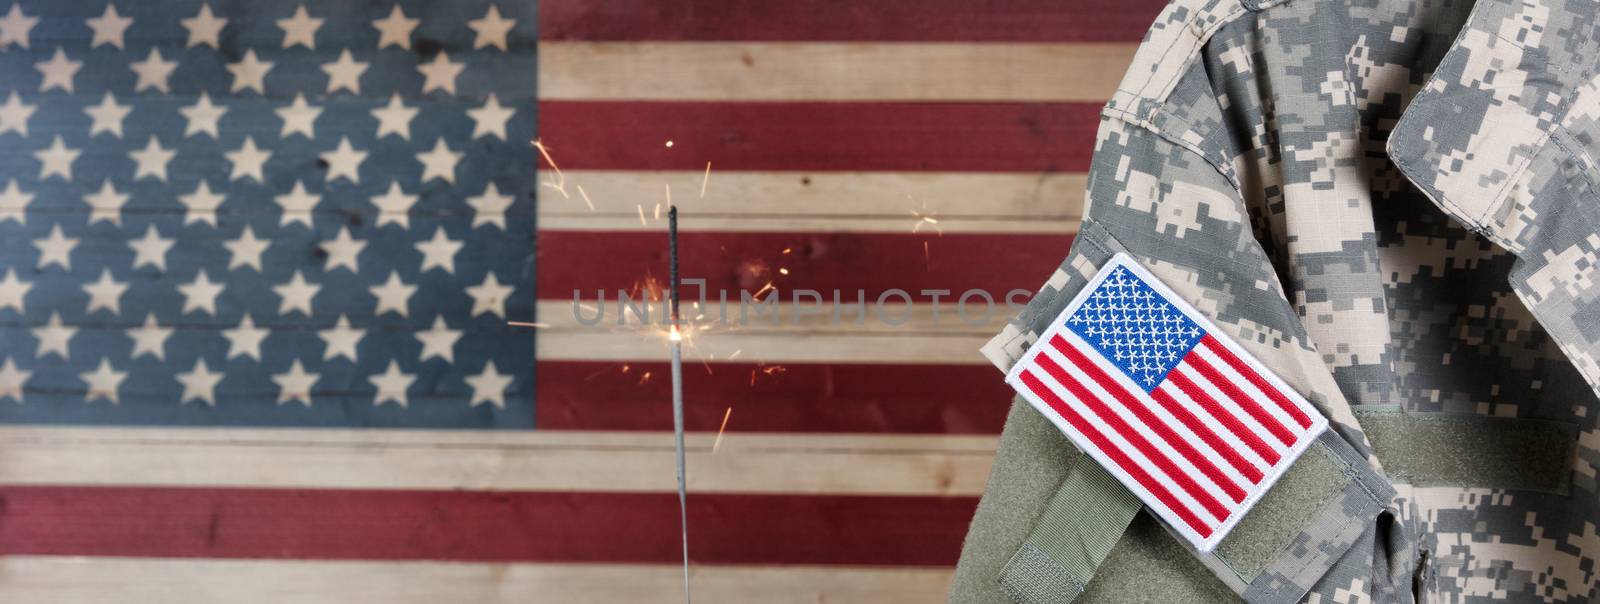 USA military uniform with rustic wooden flag of United States of by tab1962